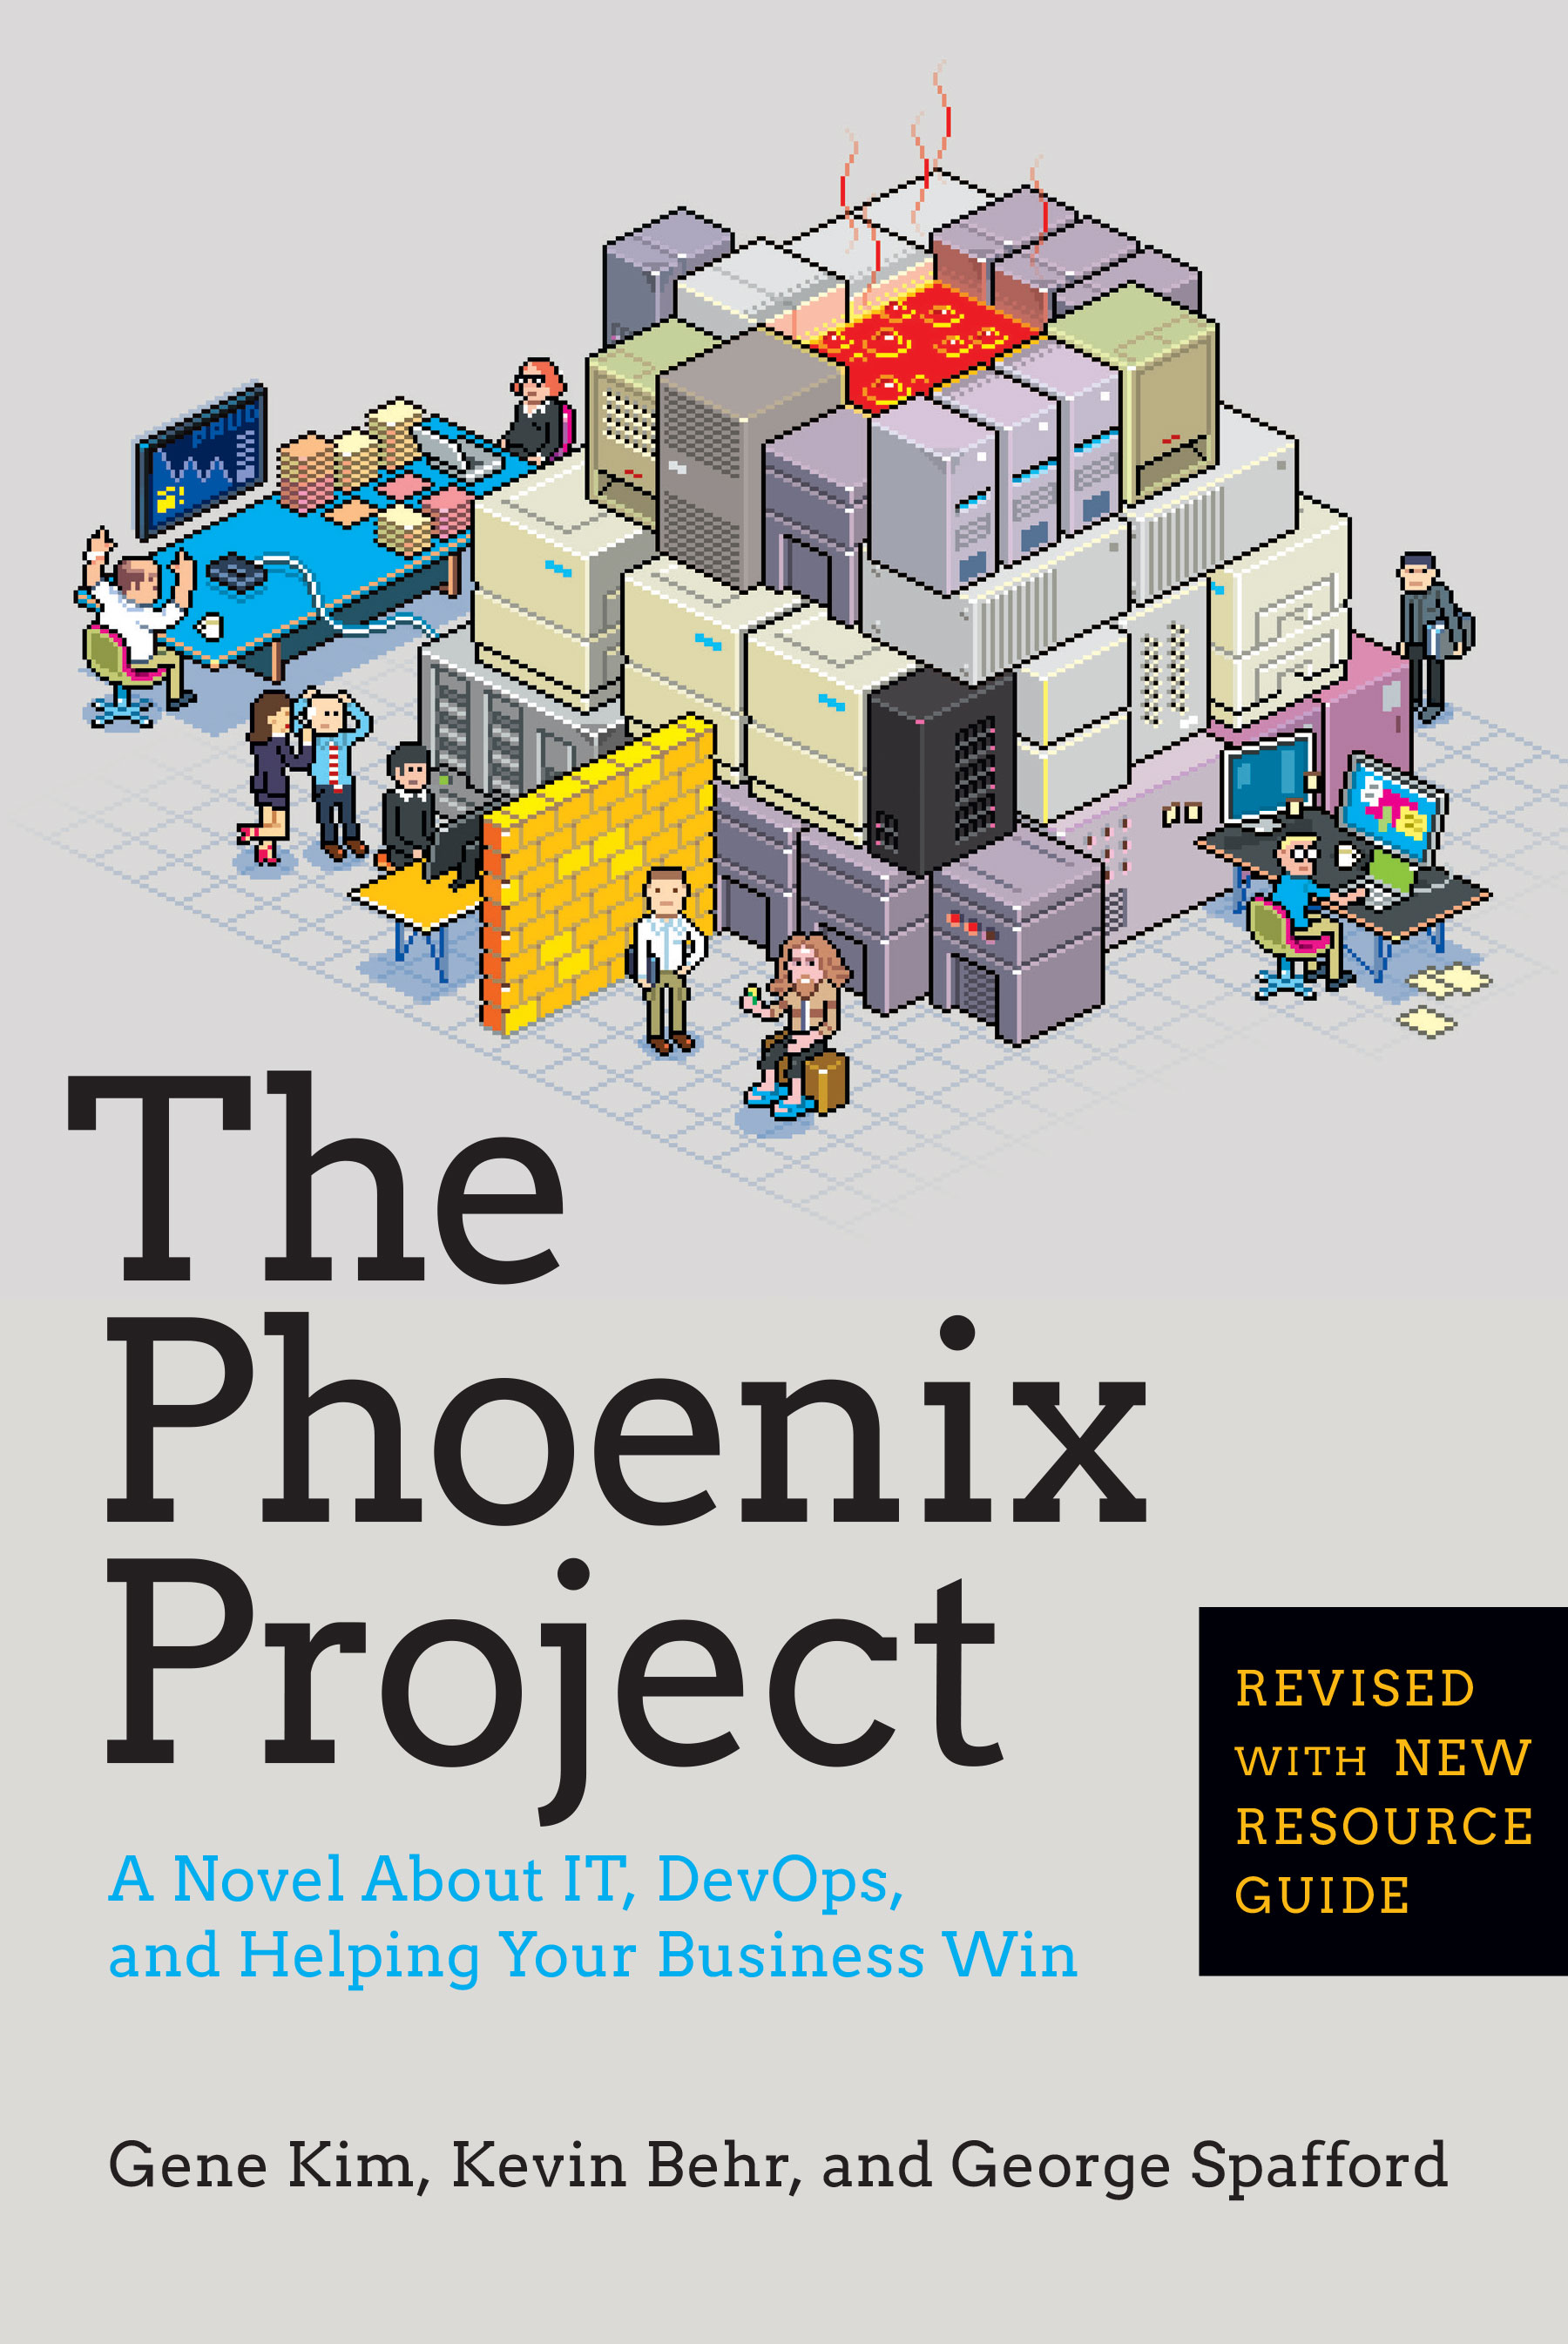 Cover art for book: The Phoenix Project